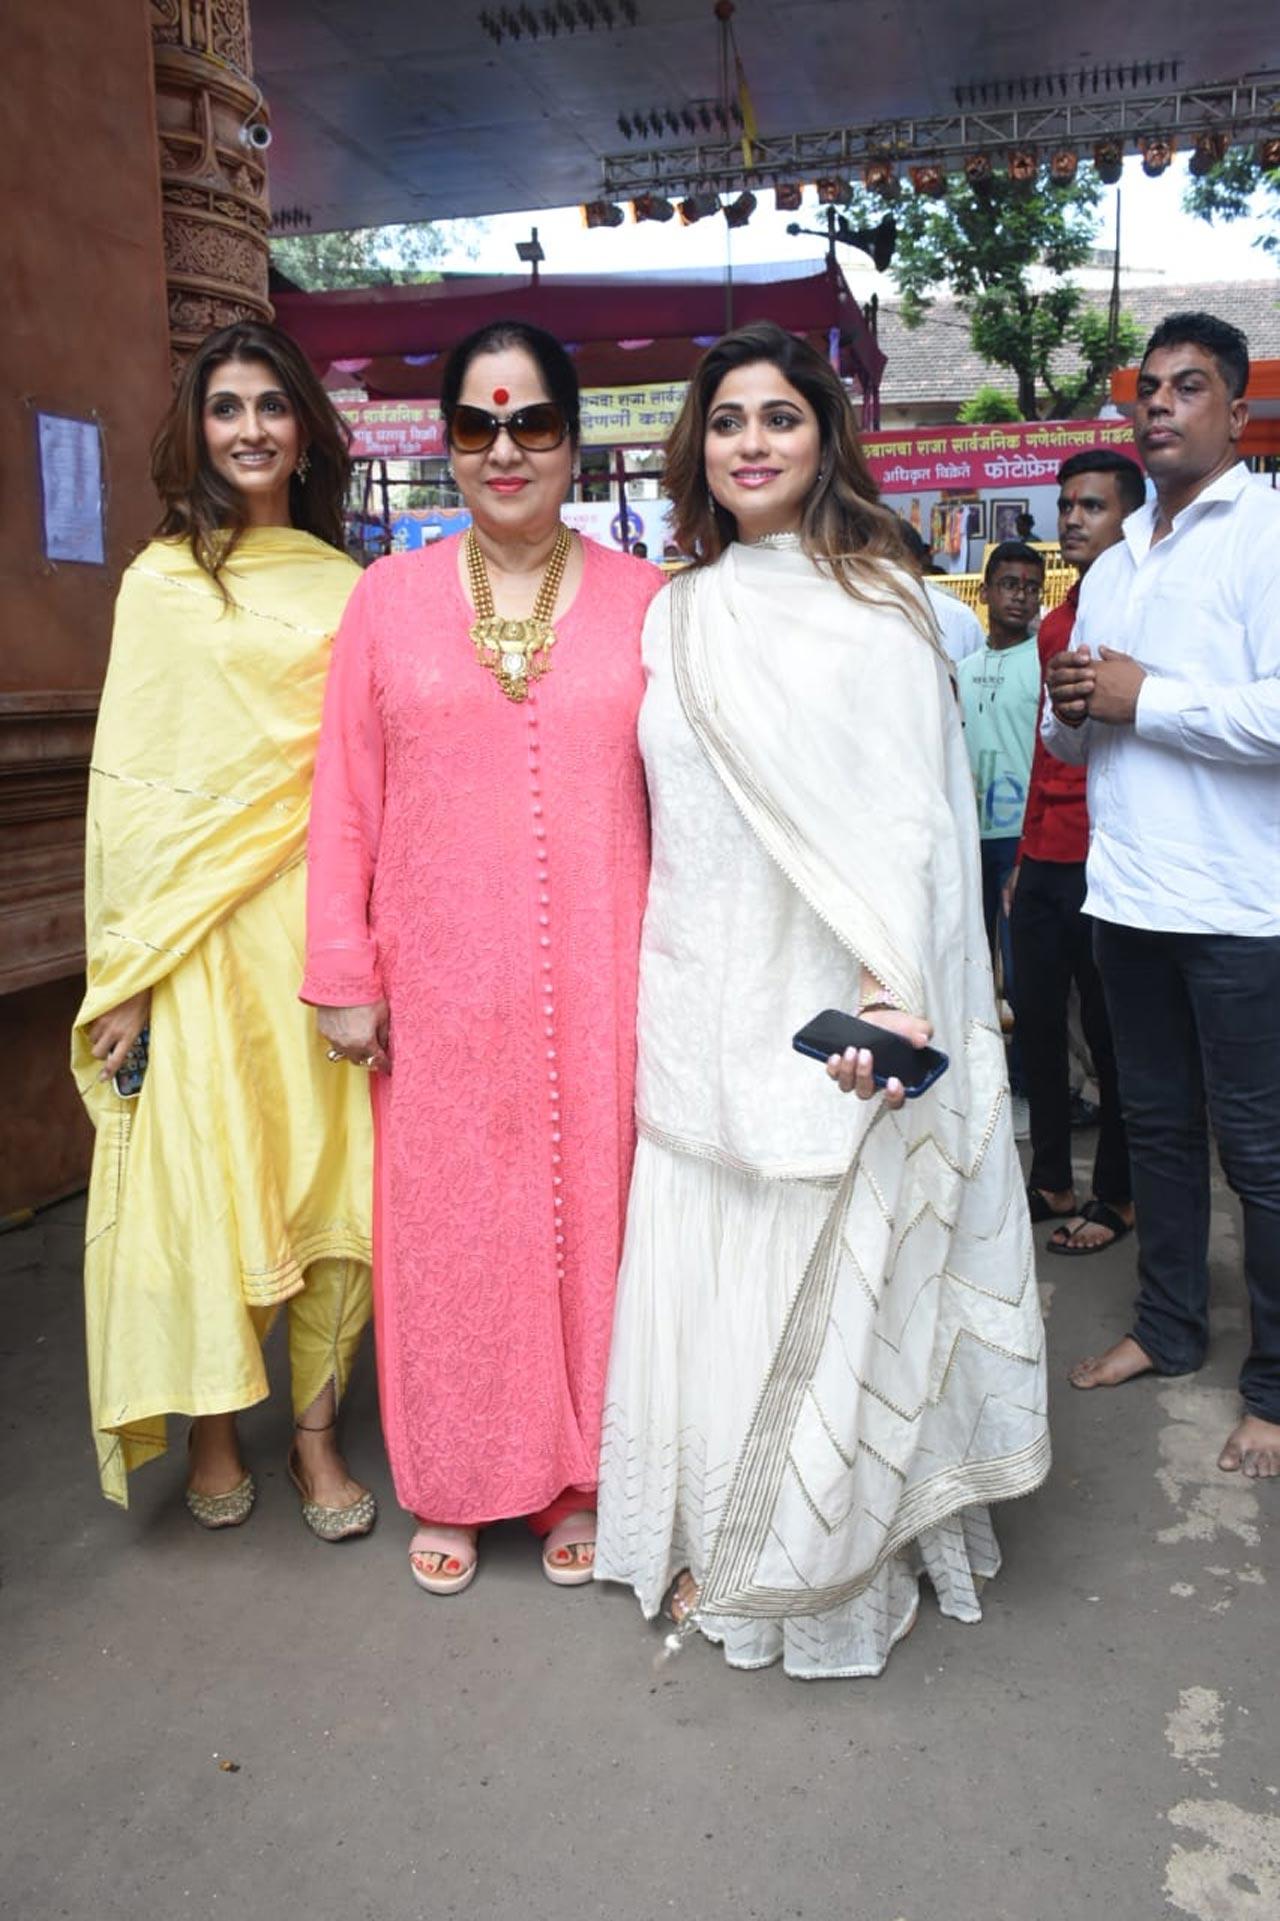 Shilpa Shetty and Shamita Shetty's viral video of Ganesh visarjan took over the internet a few days ago. The Shetty sisters were seen dancing to the popular tunes, and was accompanied by mother Sunanda and kids - Viaan and Samisha